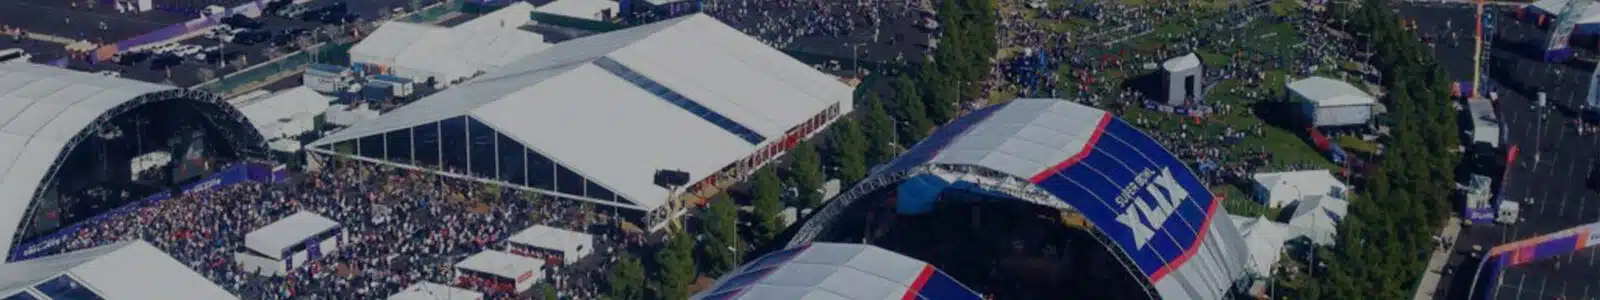 High elevation view of crowds of people outside of the University of Phoenix stadium with white and blue tents for Super Bowl XLIX